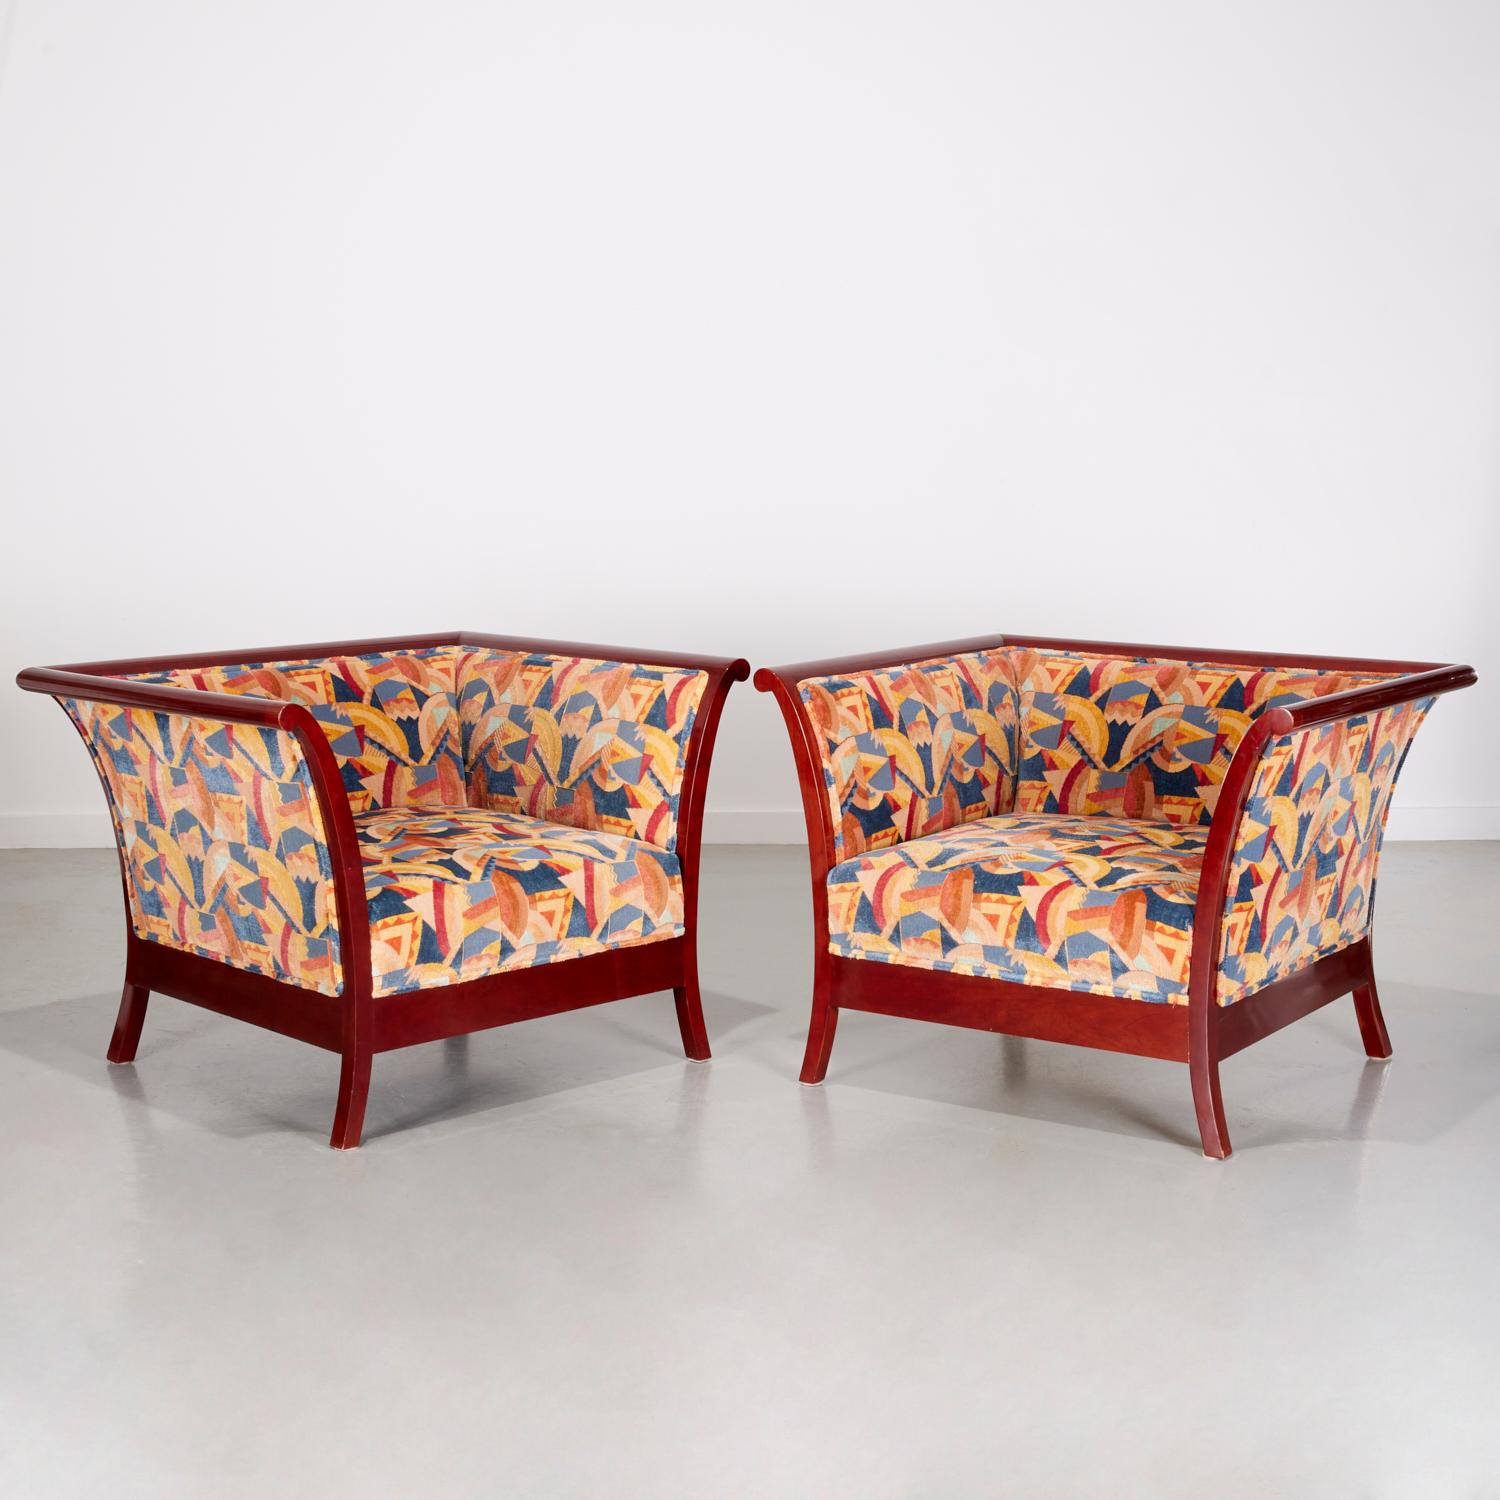 Kenneth Winslow Club Chairs in Deco Inspired Clarence House Cut Velvet Jacquard  2